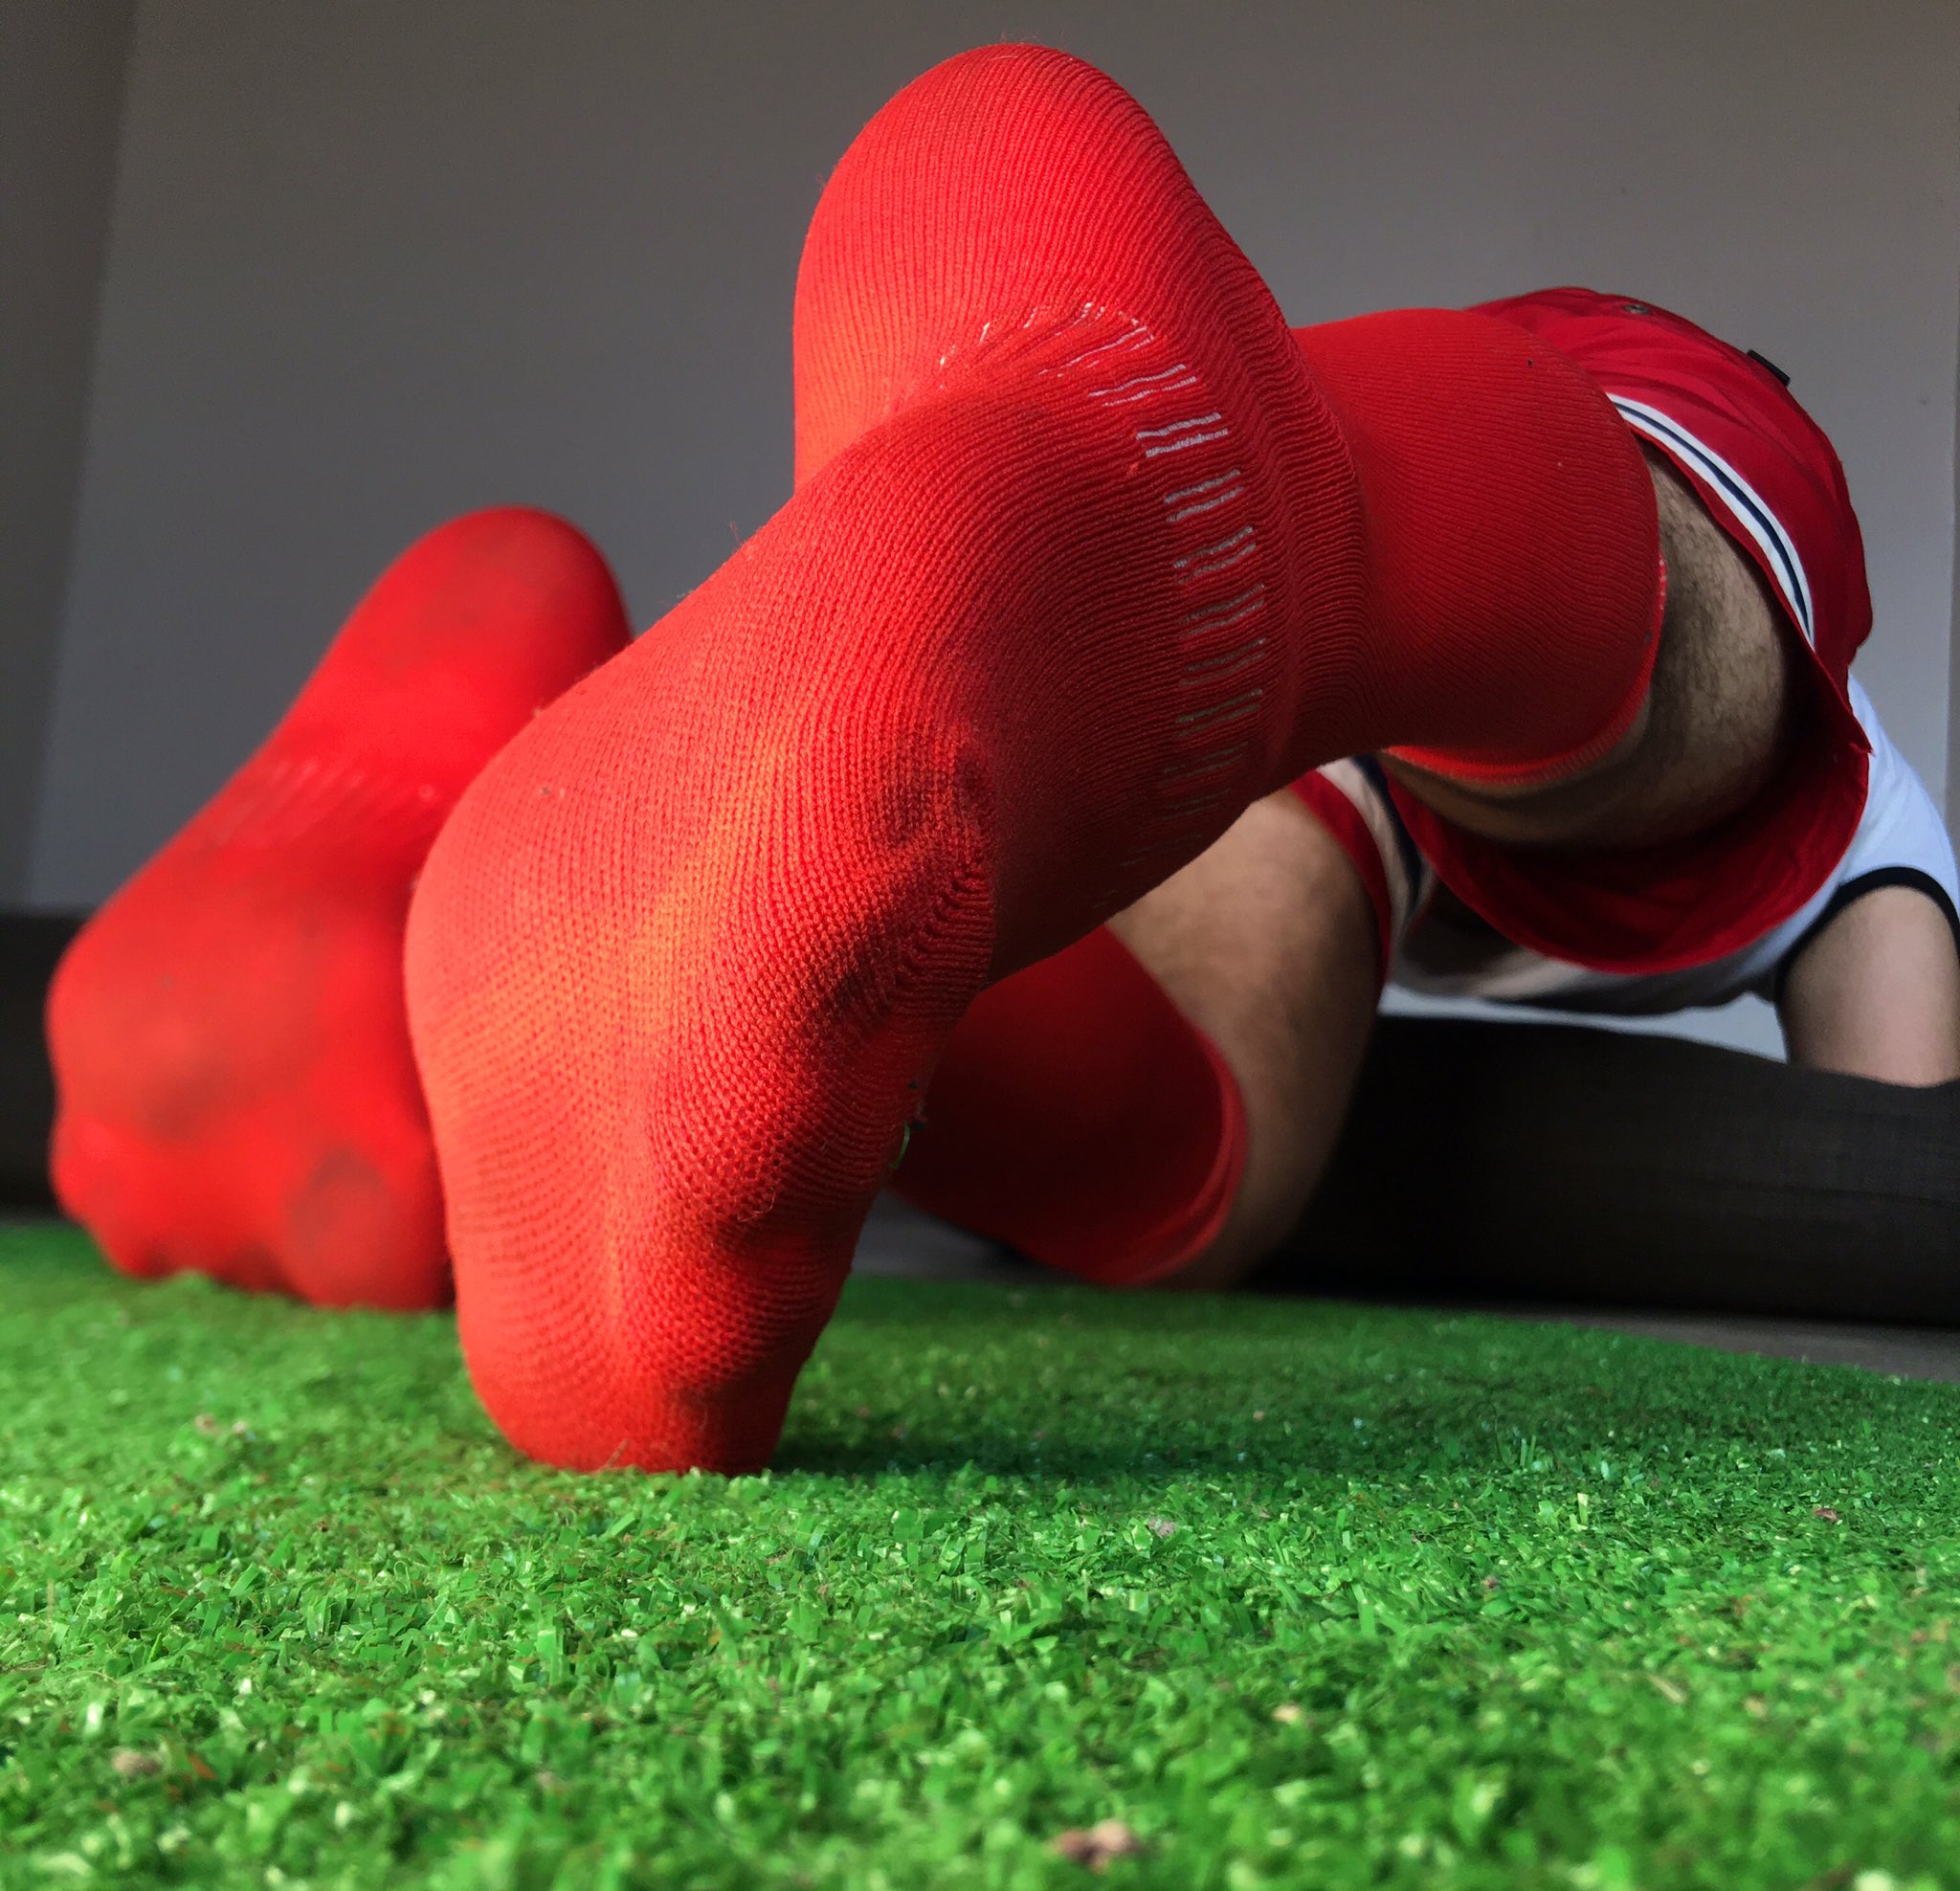 “I can see you drooling to my alpha feet in these red sports socks 😈 #gayf...